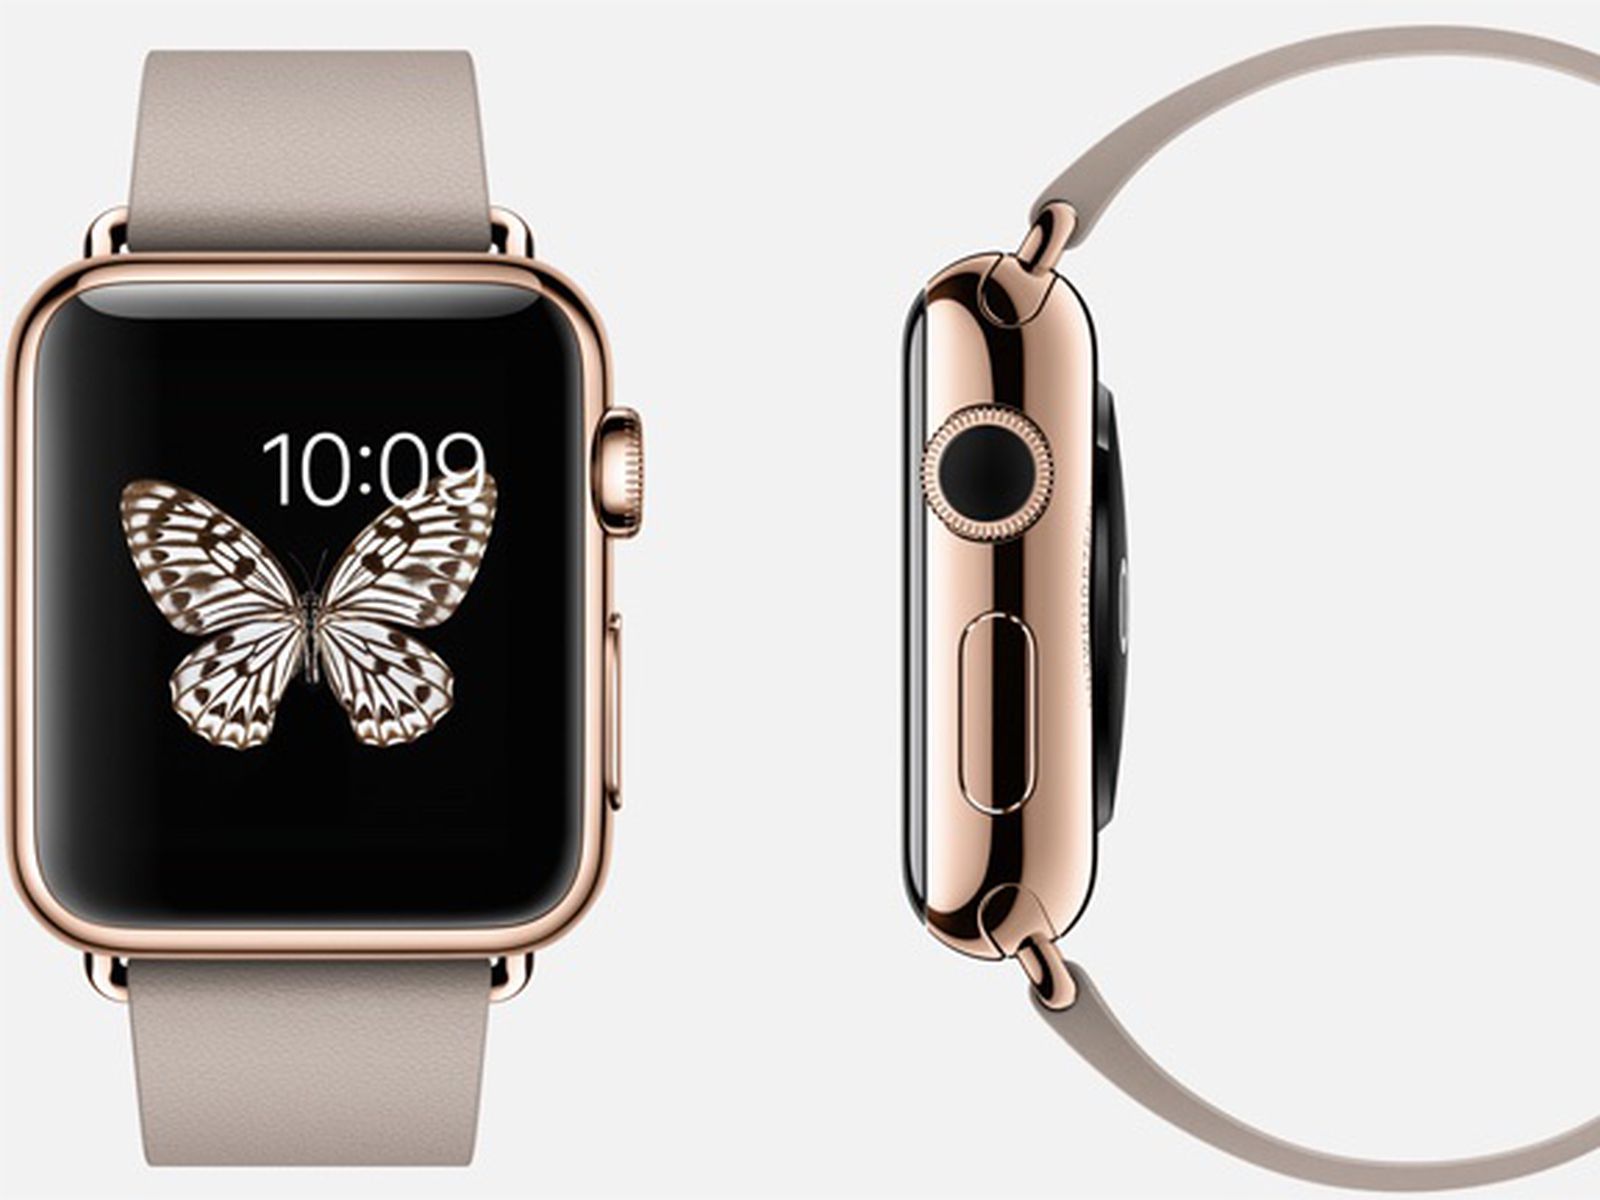 iOS  May Be Released in March, Ahead of April Apple Watch Launch -  MacRumors